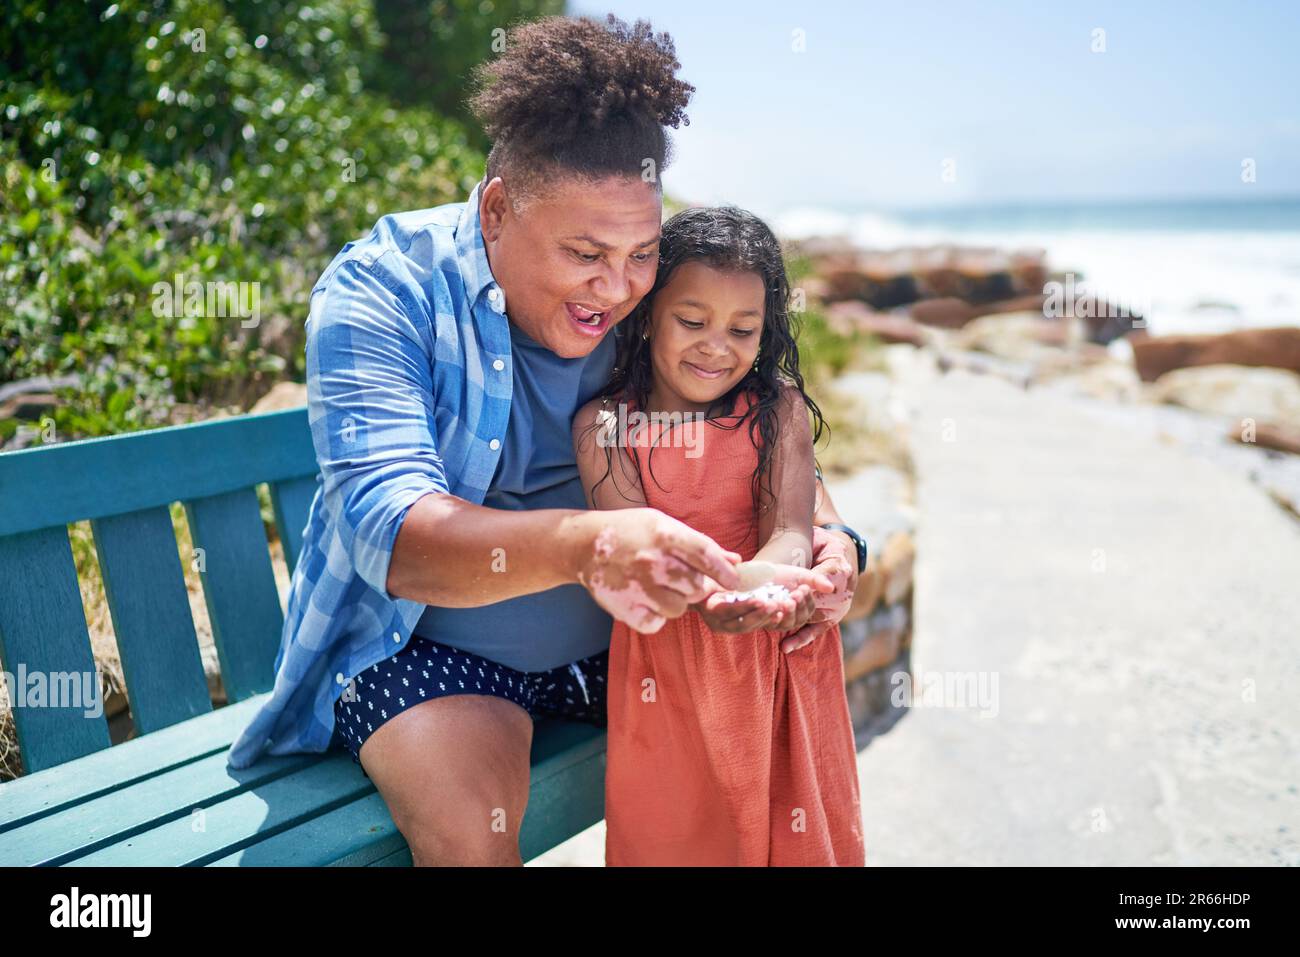 Excited father and daughter looking at seashells on beach boardwalk Stock Photo